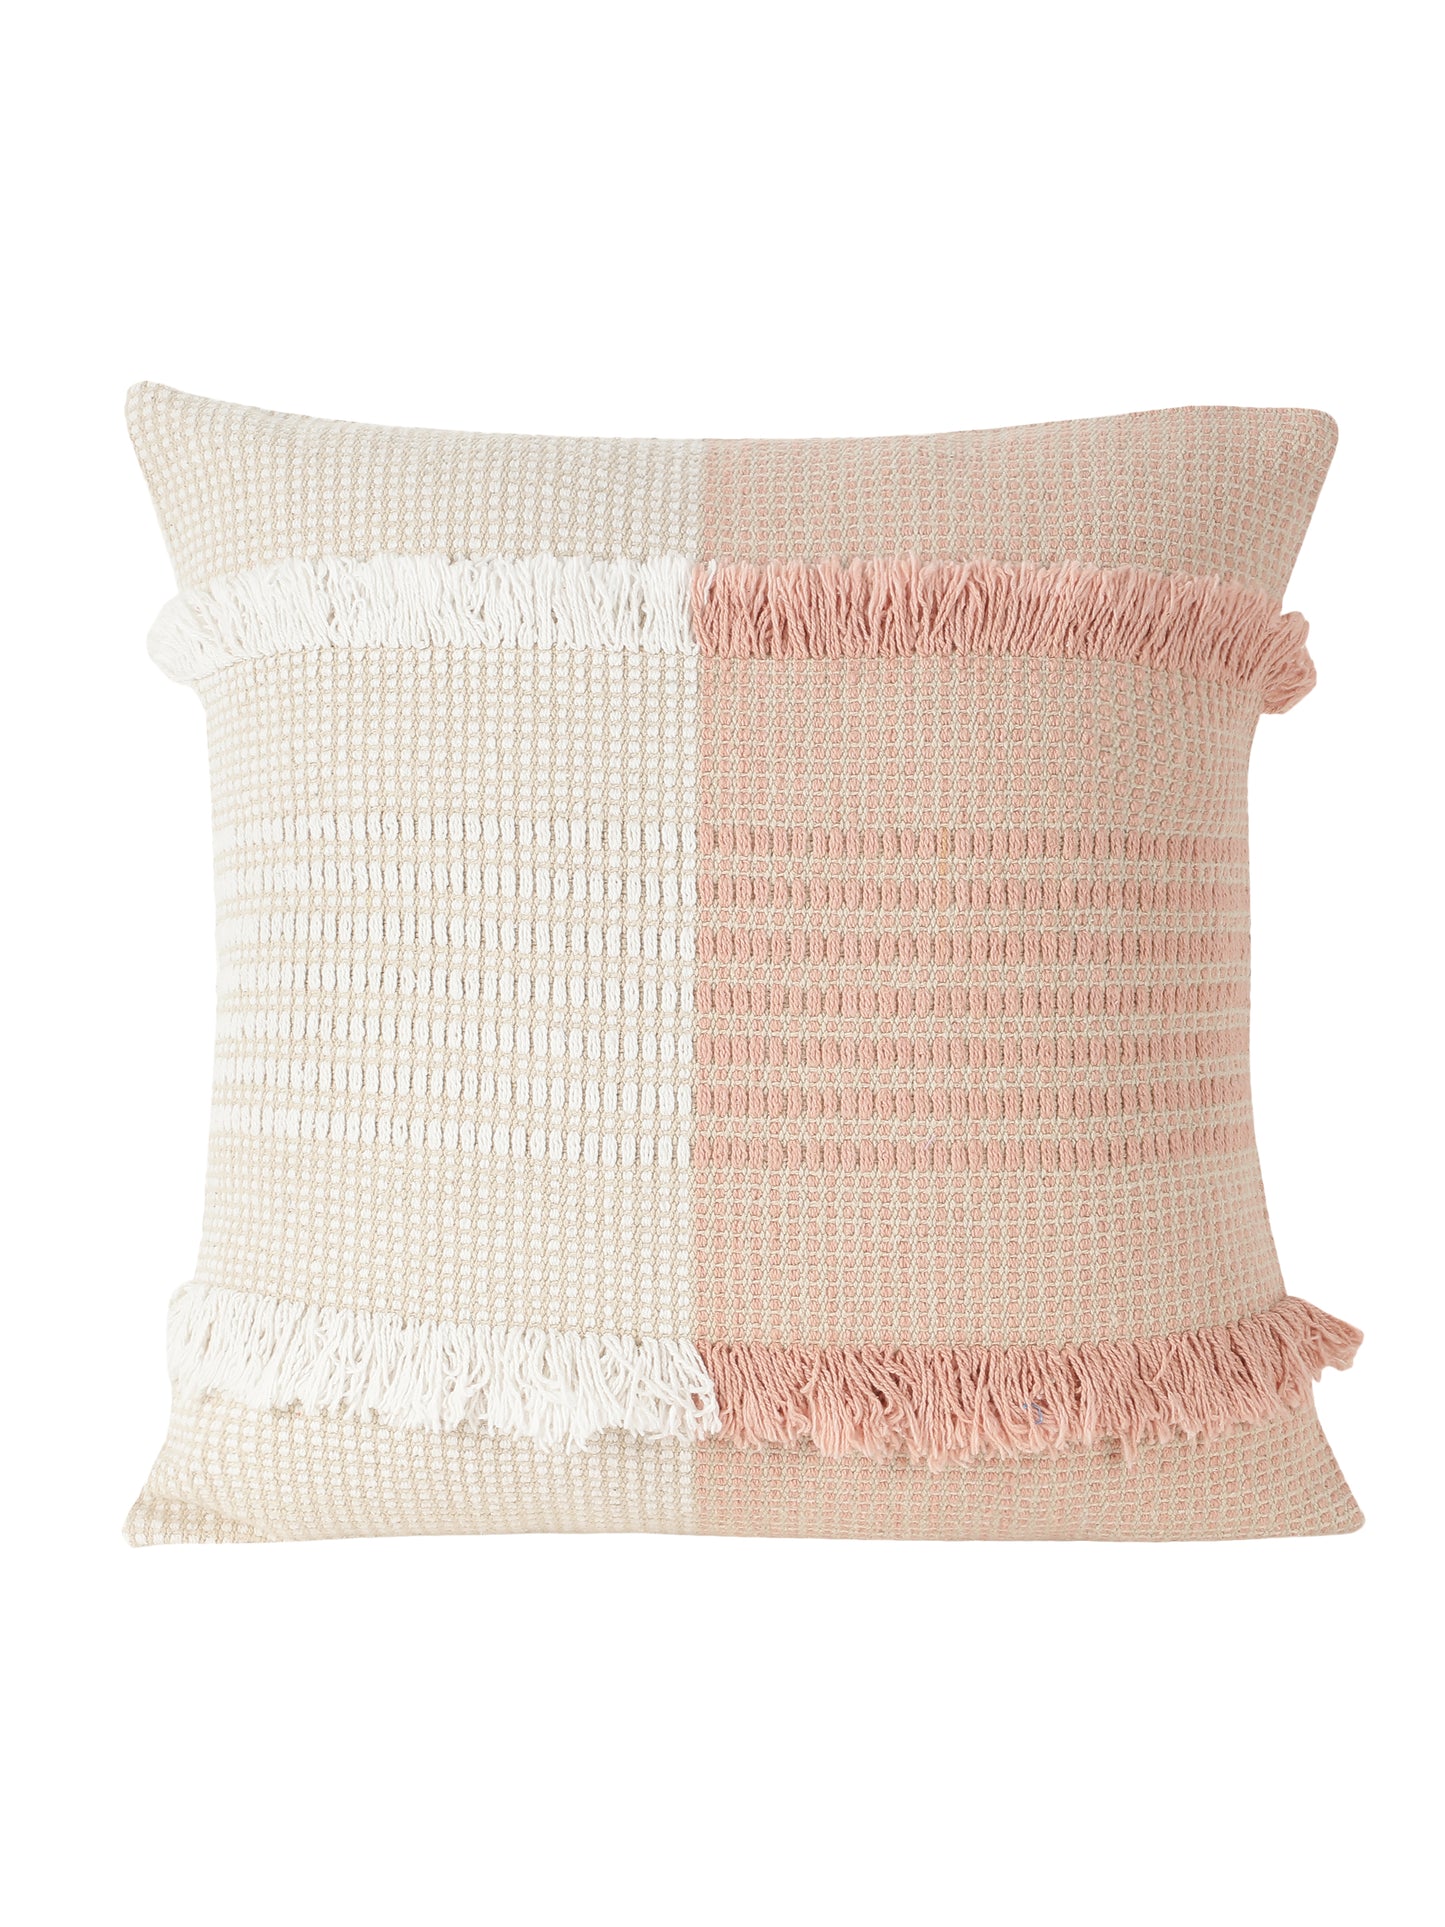 Cotton Jacquard Horizontal Band Tuffted Cushion Cover (set of 2) | Tufted Boho Shaggy Square Cushion Cover For Sofa, Bed, Office | Decorative Handmade Cushion Cover | 18x18 Inch | White/ Peach